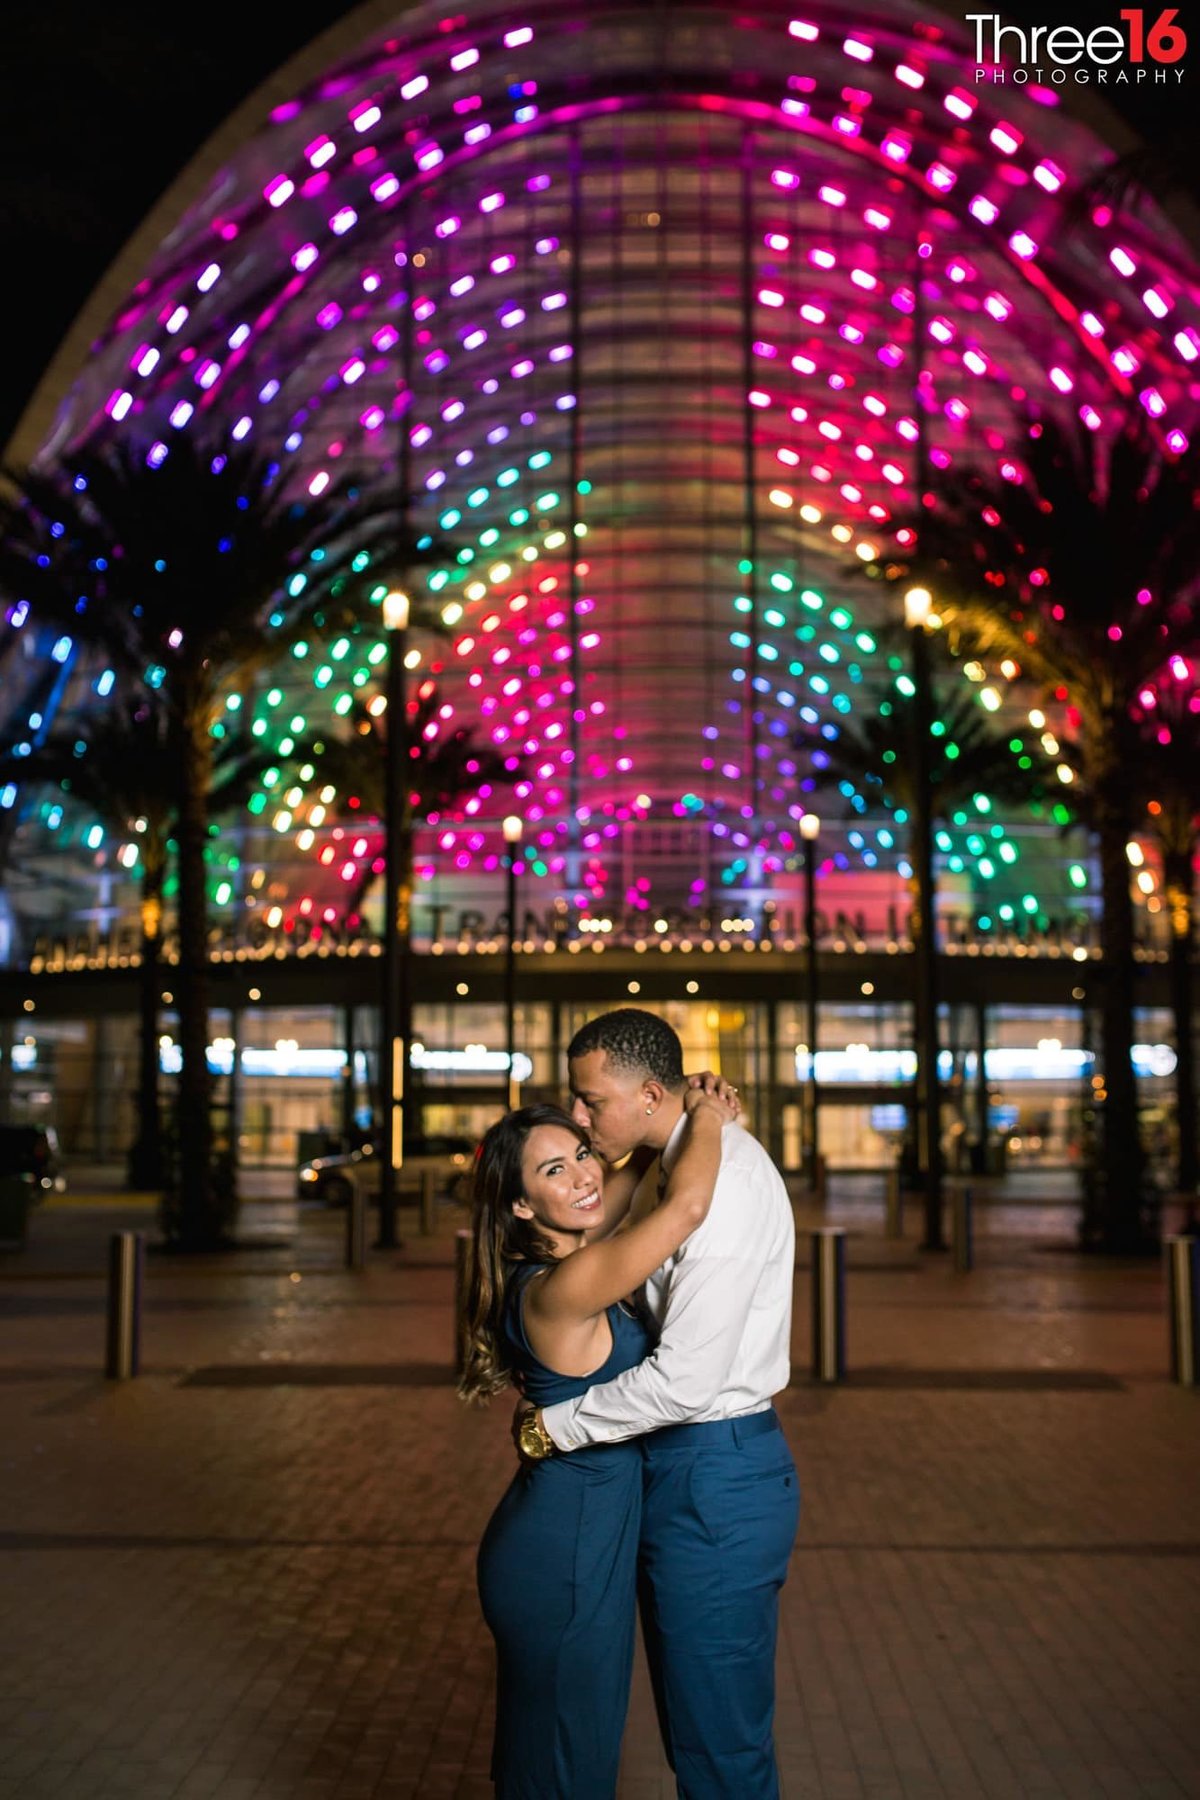 Beautiful background lights from the ARTIC Train Station during engagement session